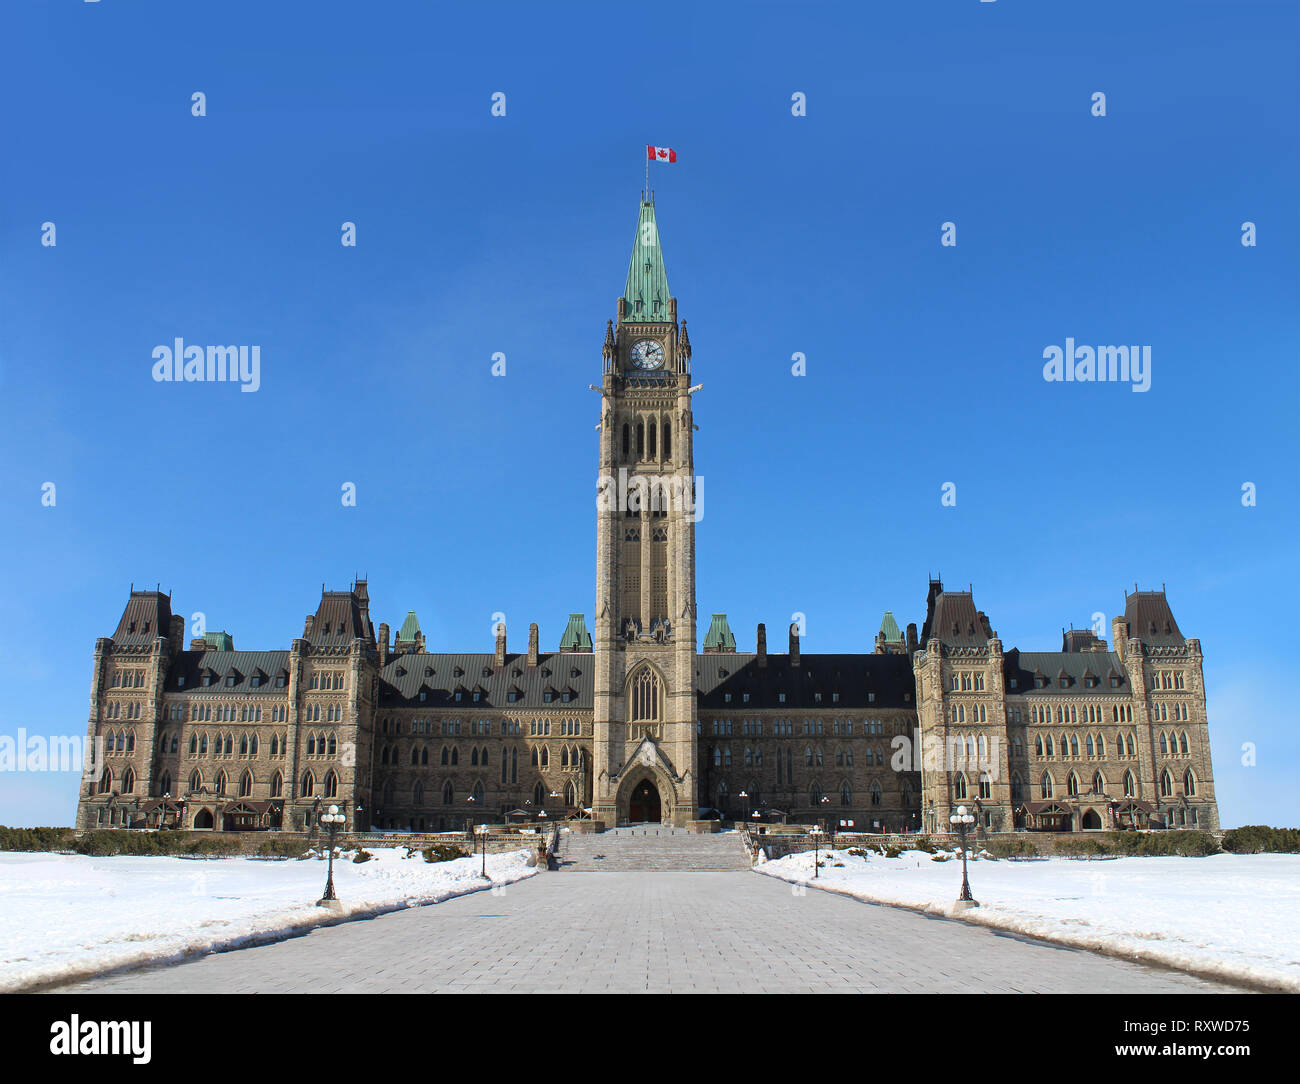 Parliament of Canada in the Canadian capital city of Ottawa Ontario as an historic building with a front view of the peace tower. Stock Photo